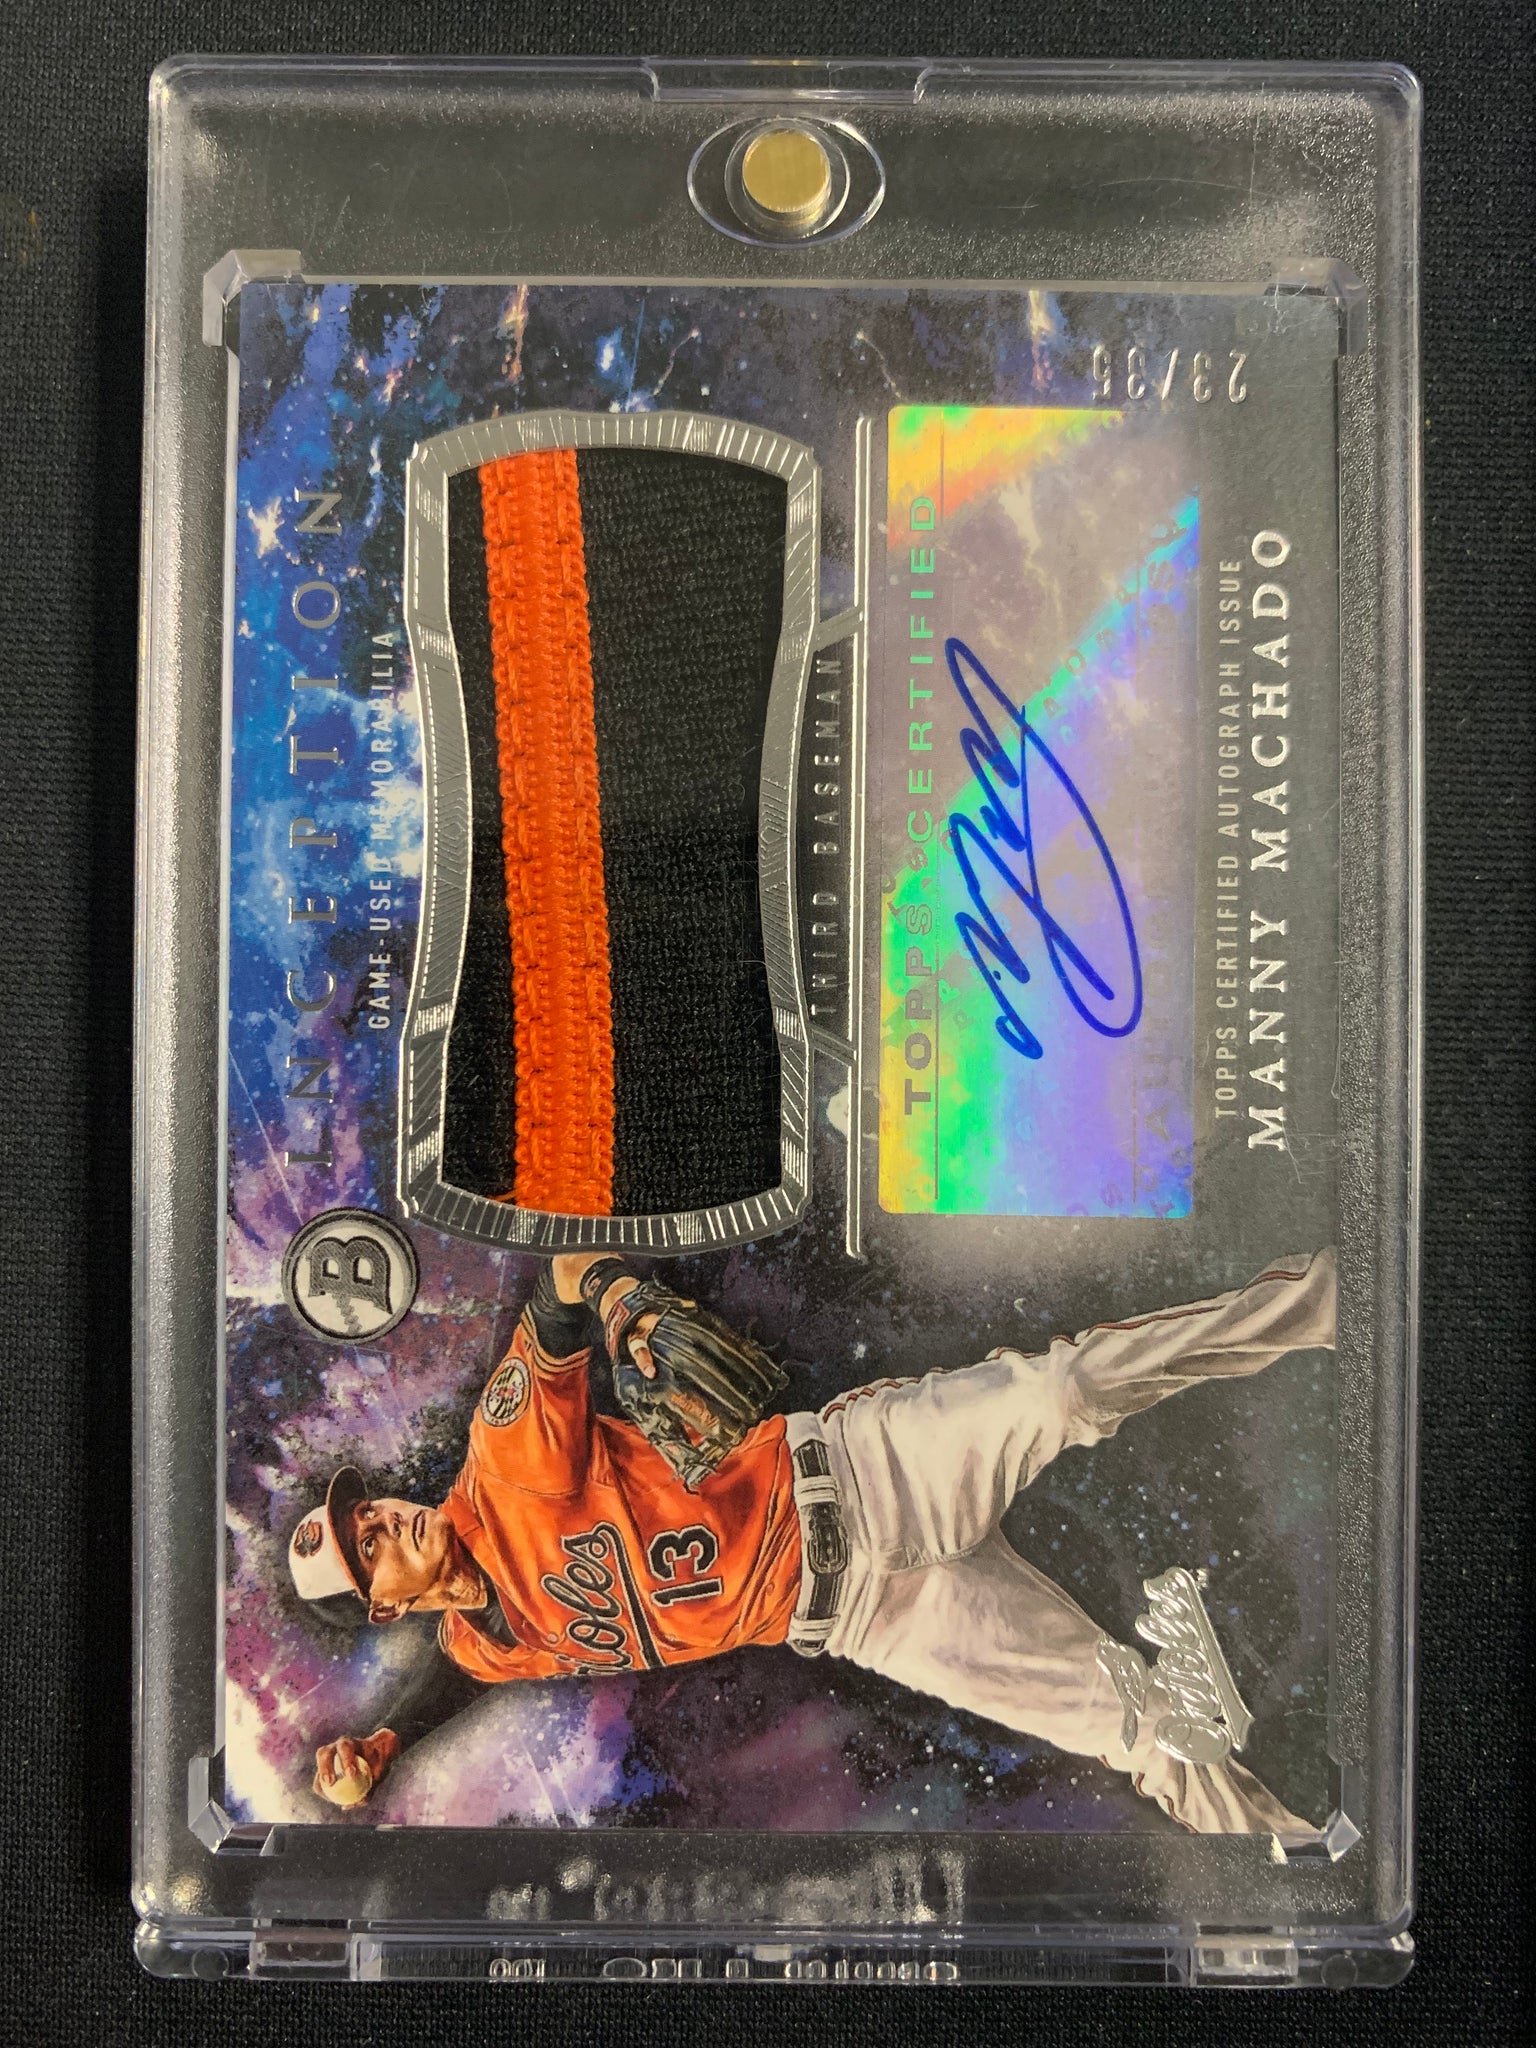 2016 TOPPS INCEPTION BASEBALL #IVAR-MM BALTIMORE ORIOLES - MANNY MACHADO 2 COLOR GAME USED PATCH AUTOGRAPH NUMBERED 23/35